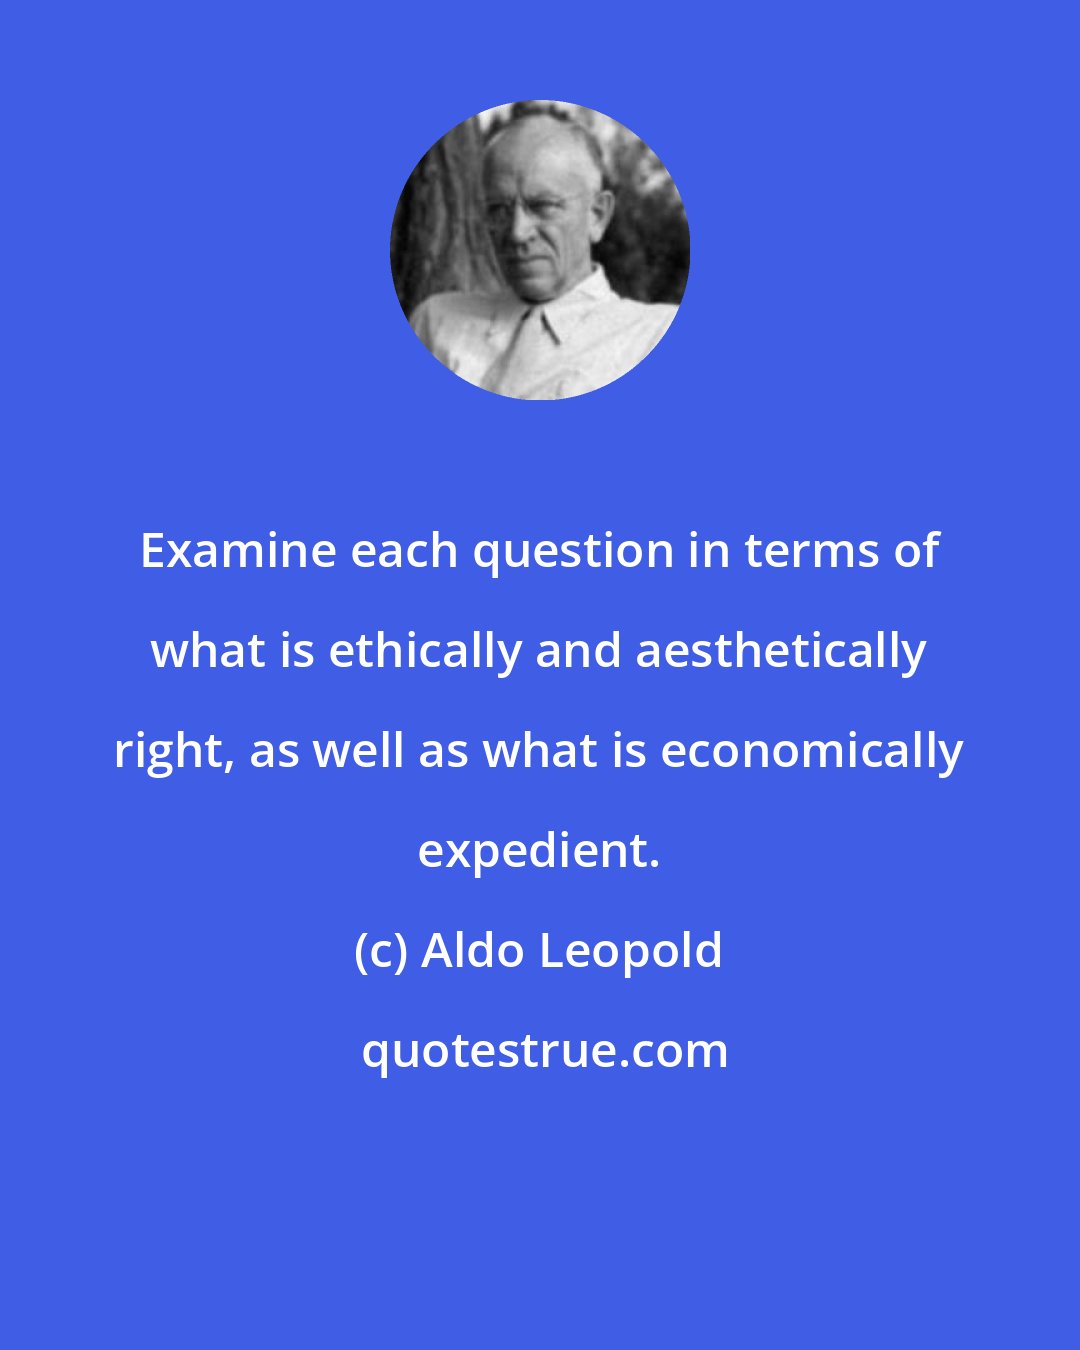 Aldo Leopold: Examine each question in terms of what is ethically and aesthetically right, as well as what is economically expedient.